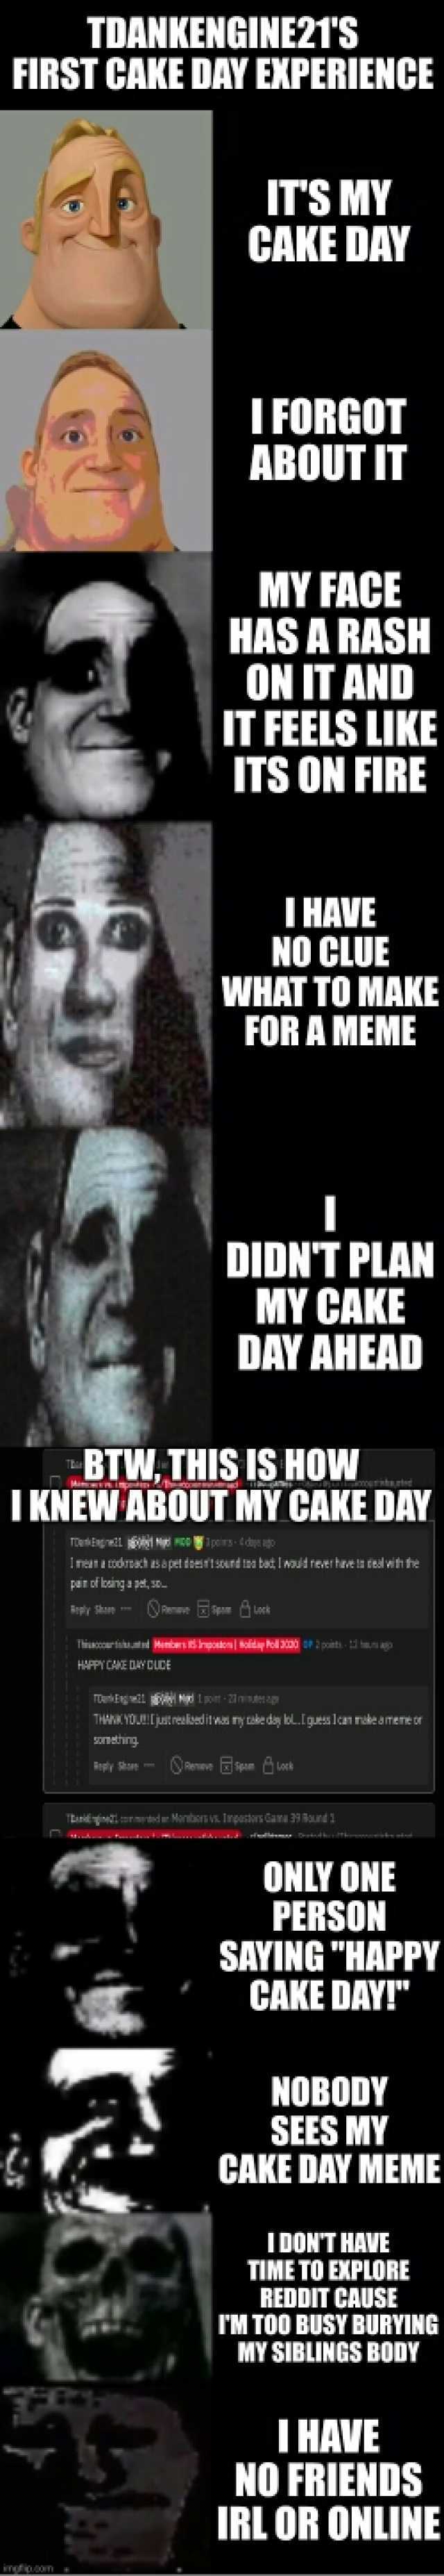 TDANKENGINE21S FIRST CAKE DAY EKPERIENCE ITS MY CAKE DAY T FORGOT ABOUT IT MY FACE HAS A RASH ON IT AND IT FEELS LIKE ITS ON FIRE T HAVE NO CLUE WHAT TO MAKE FOR A MEME DIDNT PLAN MY CAKE DAY AHEAD BTW.THIS IS HOW IKNEW ABOUT MY C